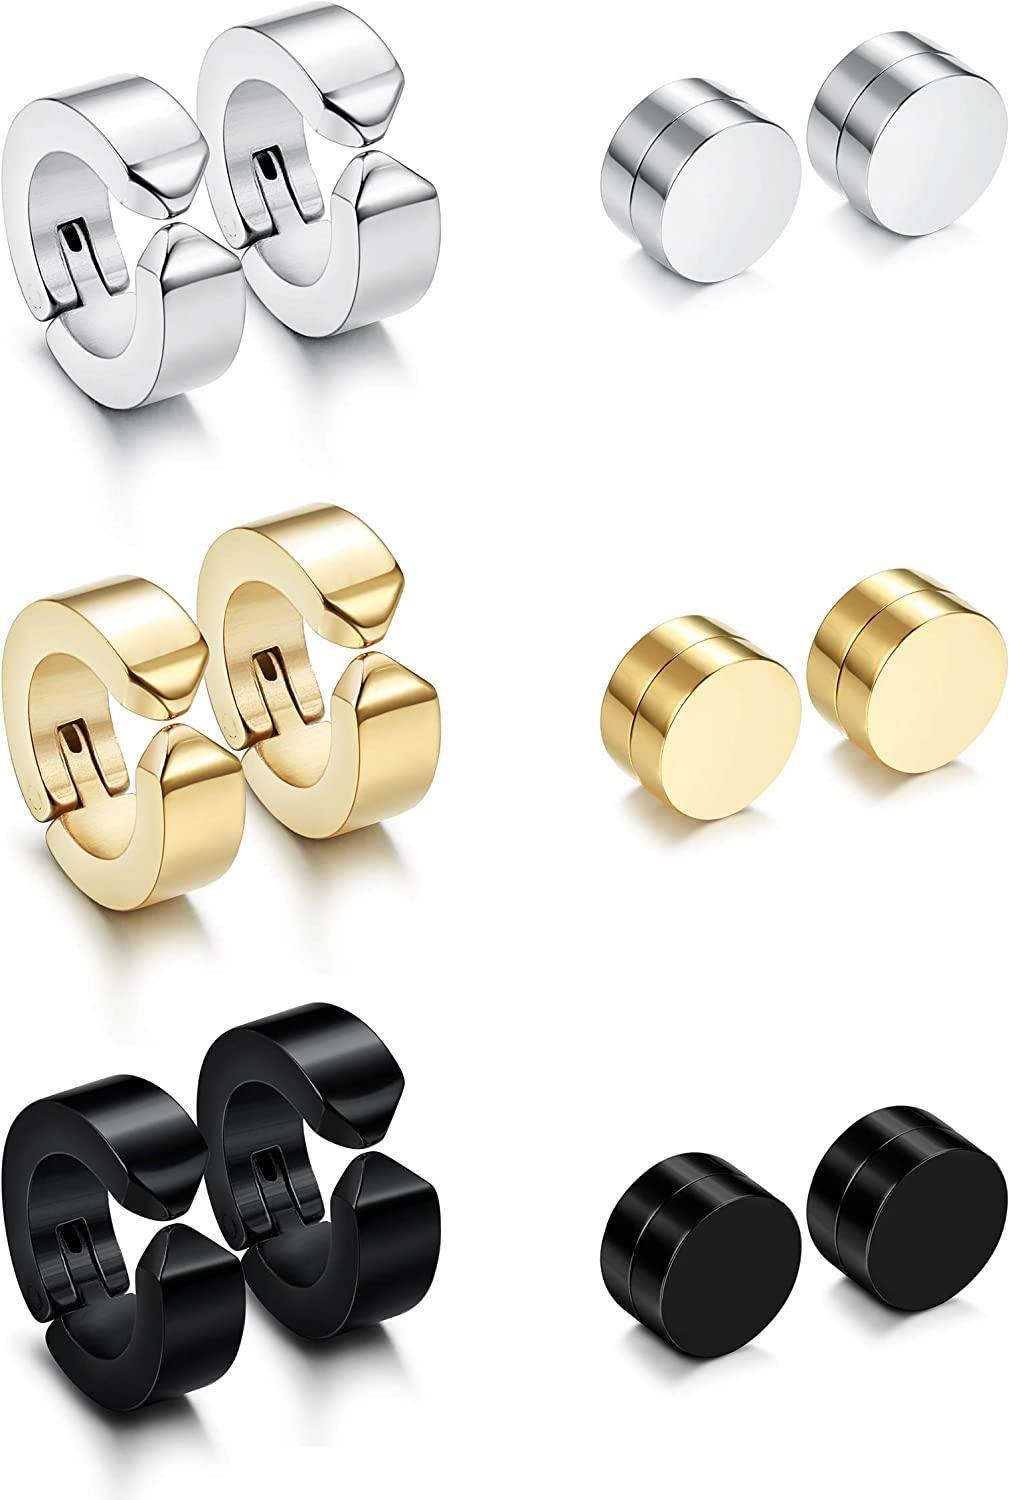 A collection of 6 pairs of stainless hoop earrings in silver, gold, and black colors made from 316L stainless steel displayed in pairs, featuring a simple, polished design.